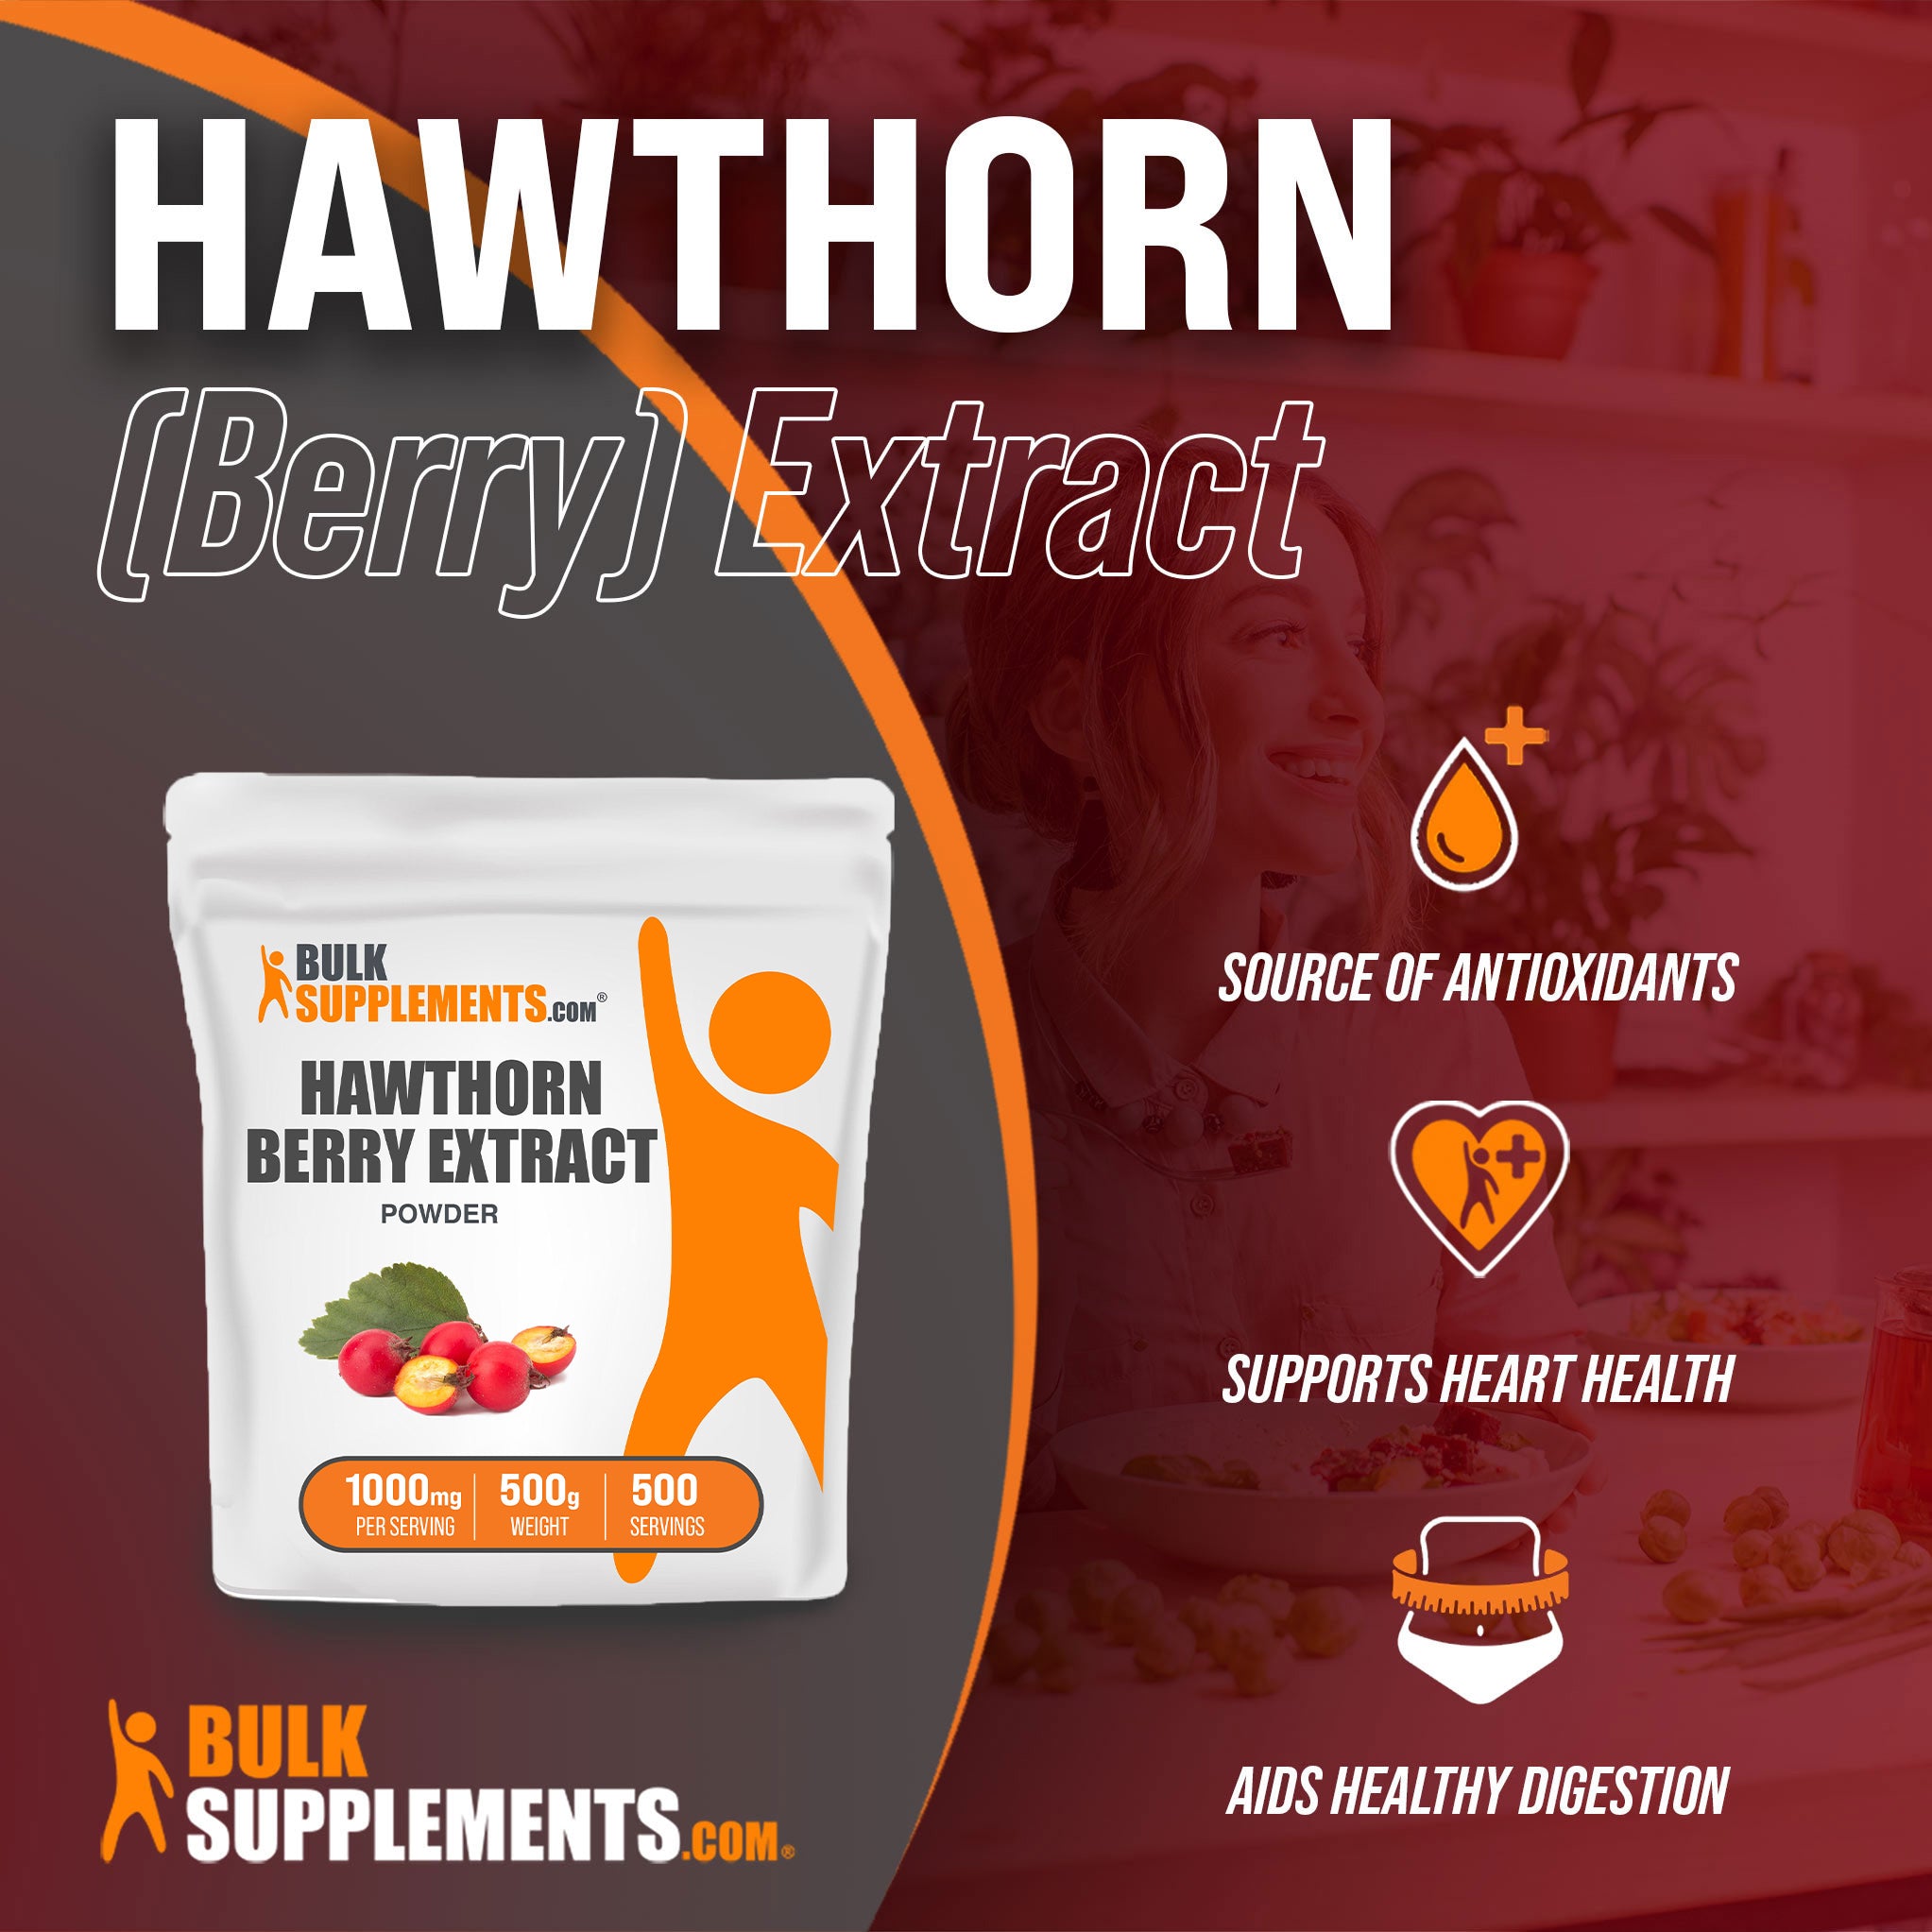 Benefits of Hawthorn Berry Extract; source of antioxidants, supports heart health, aids healthy digestion